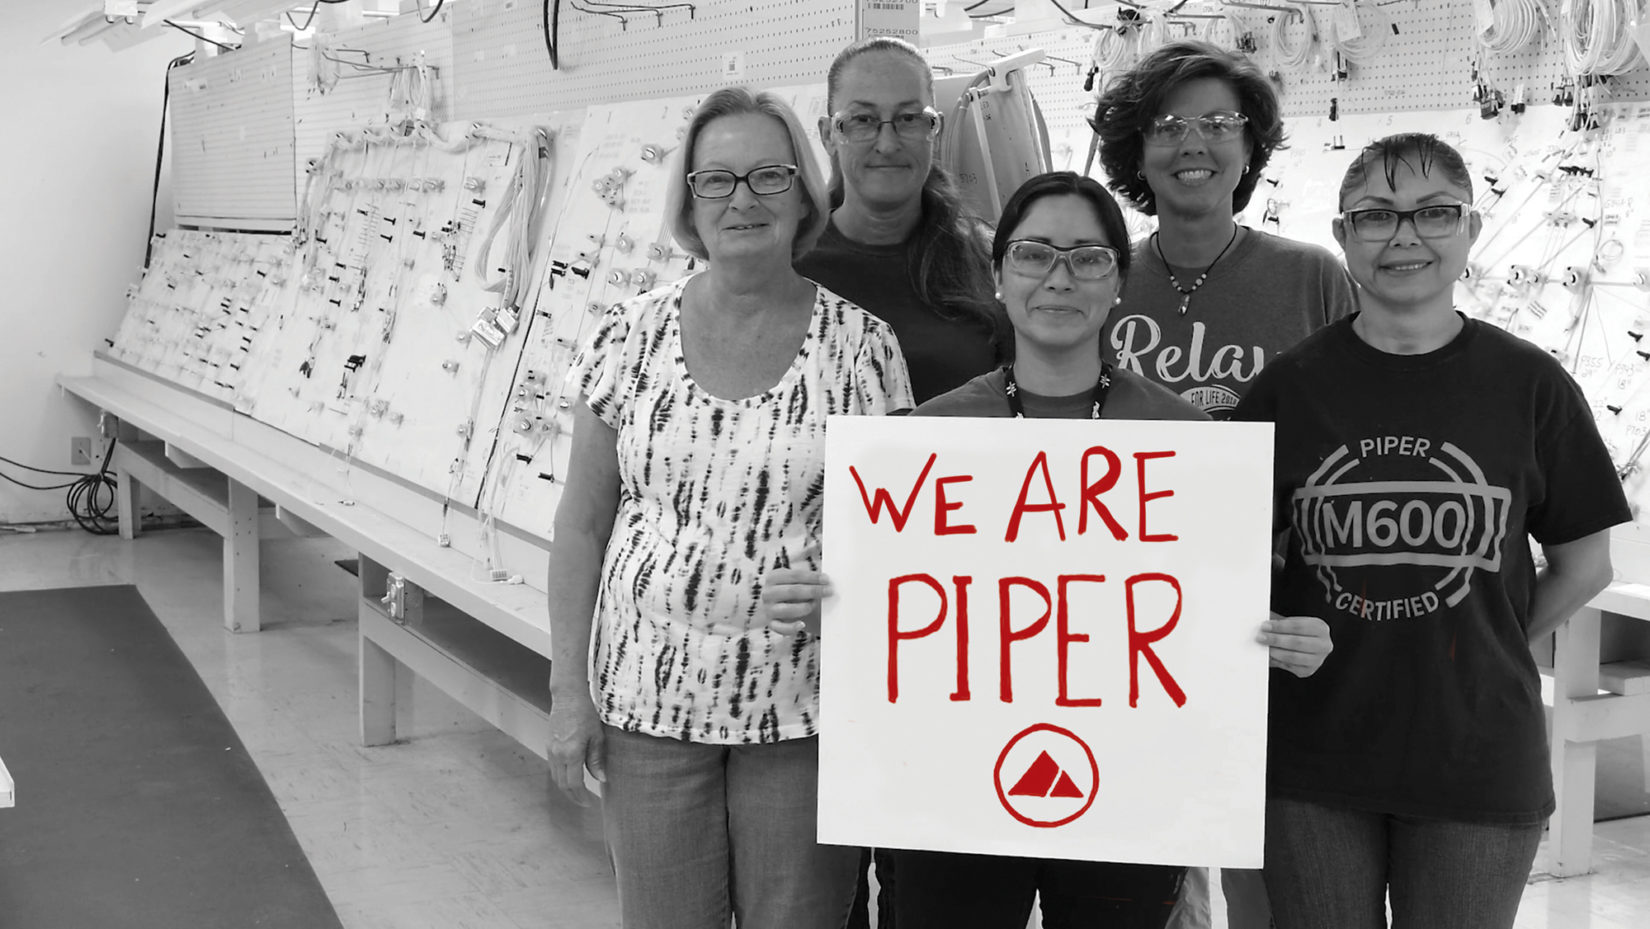 Piper employees holding a sign that says "We are Piper"